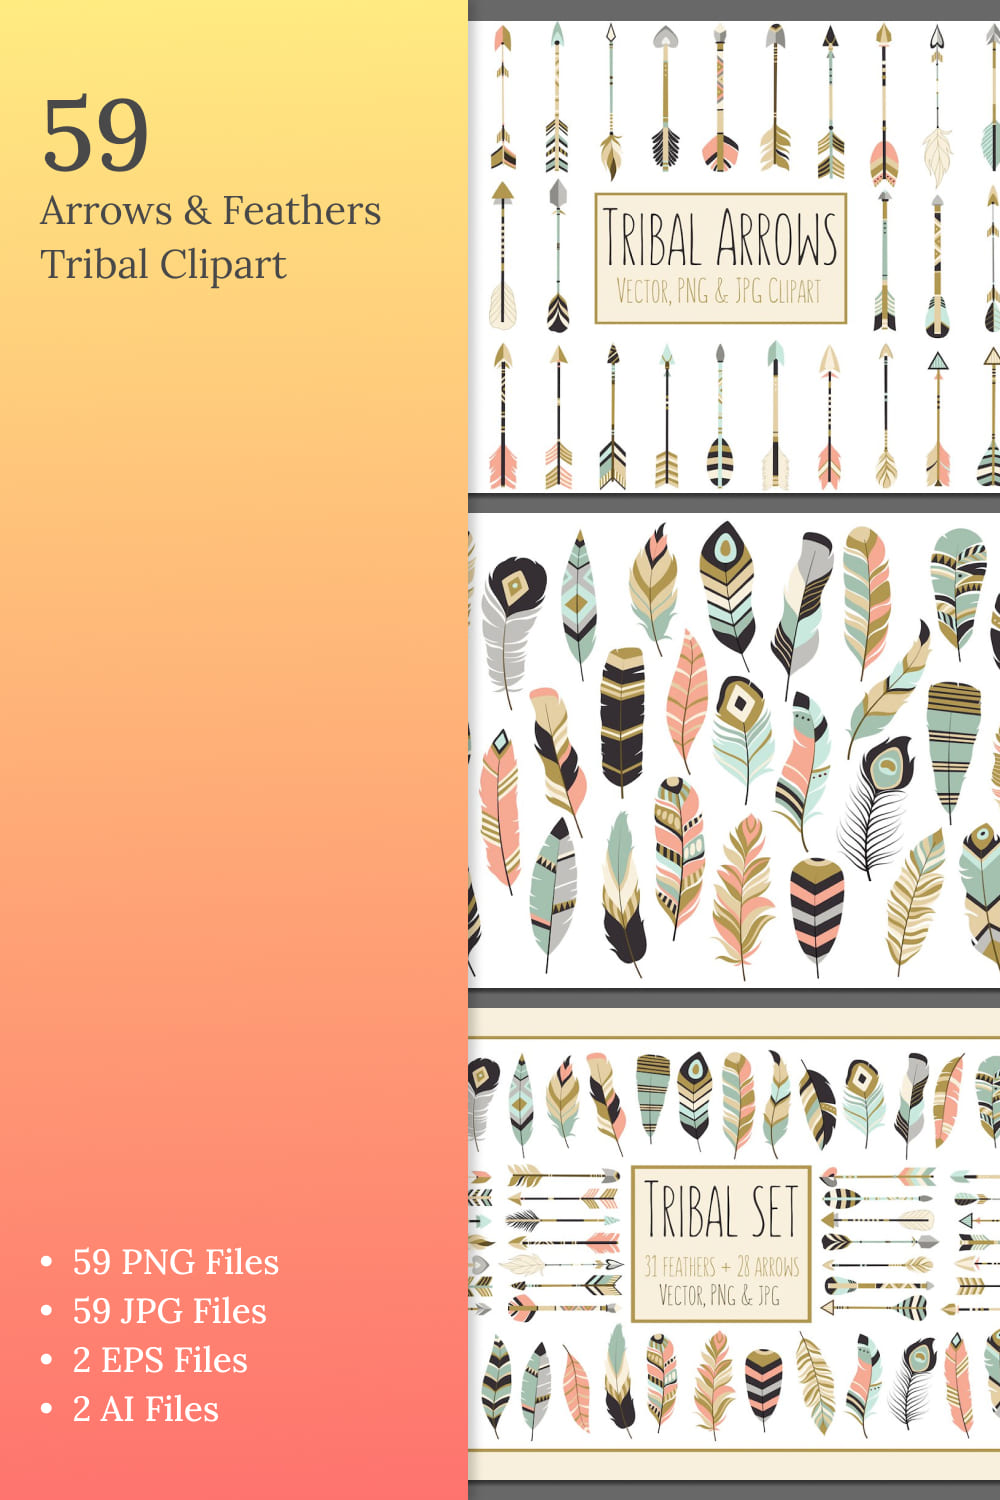 59 arrows feathers tribal clipart set.